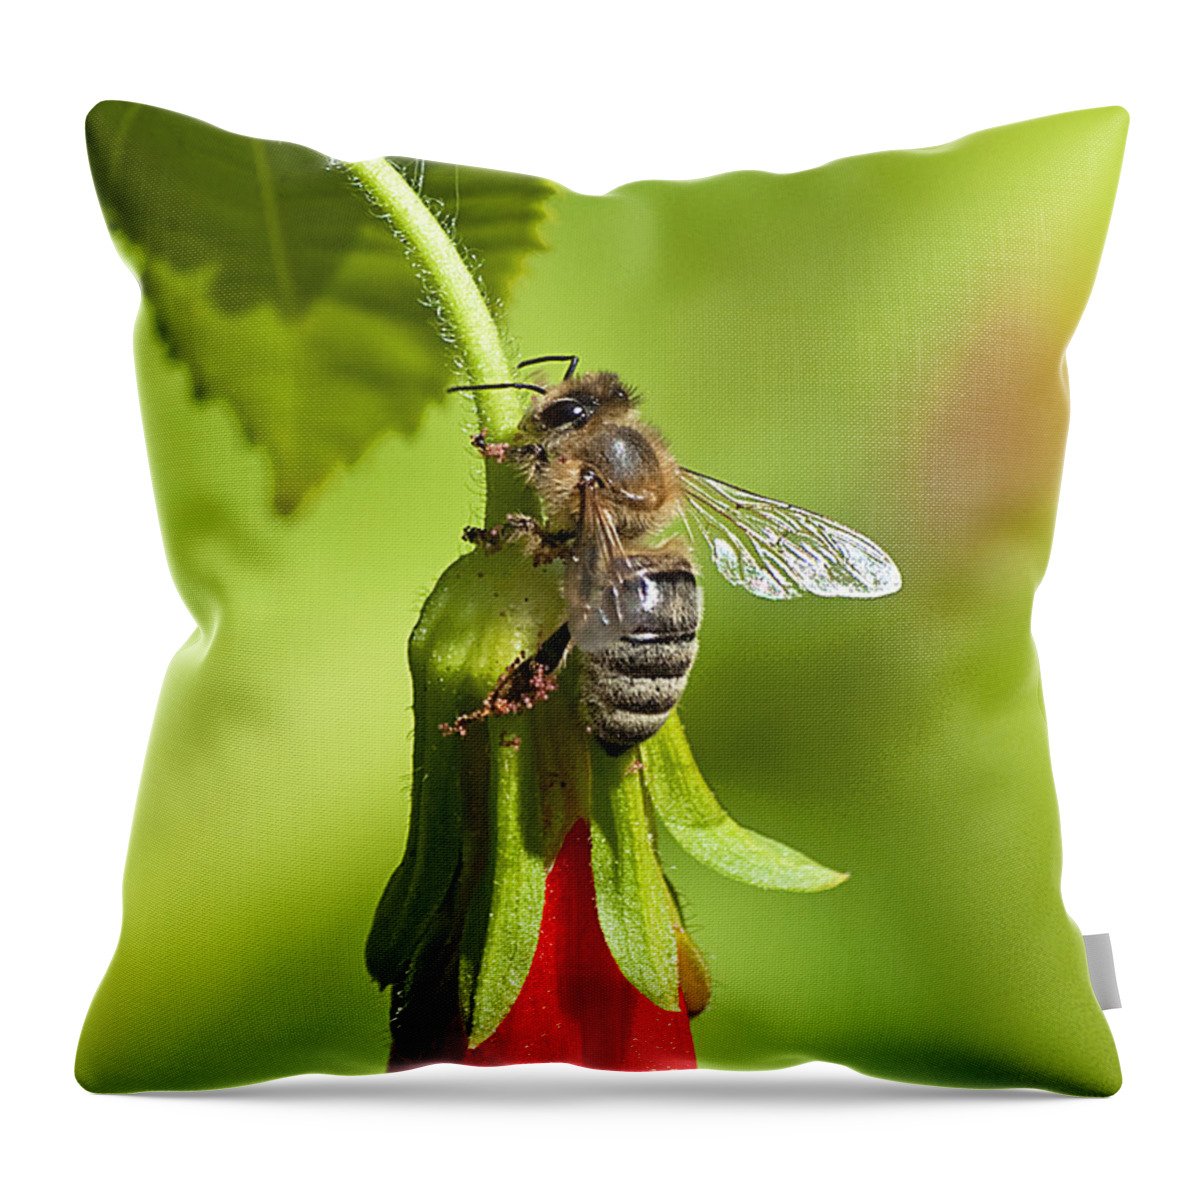 Wildlife Throw Pillow featuring the photograph Honey Bee 11 by Kenneth Albin